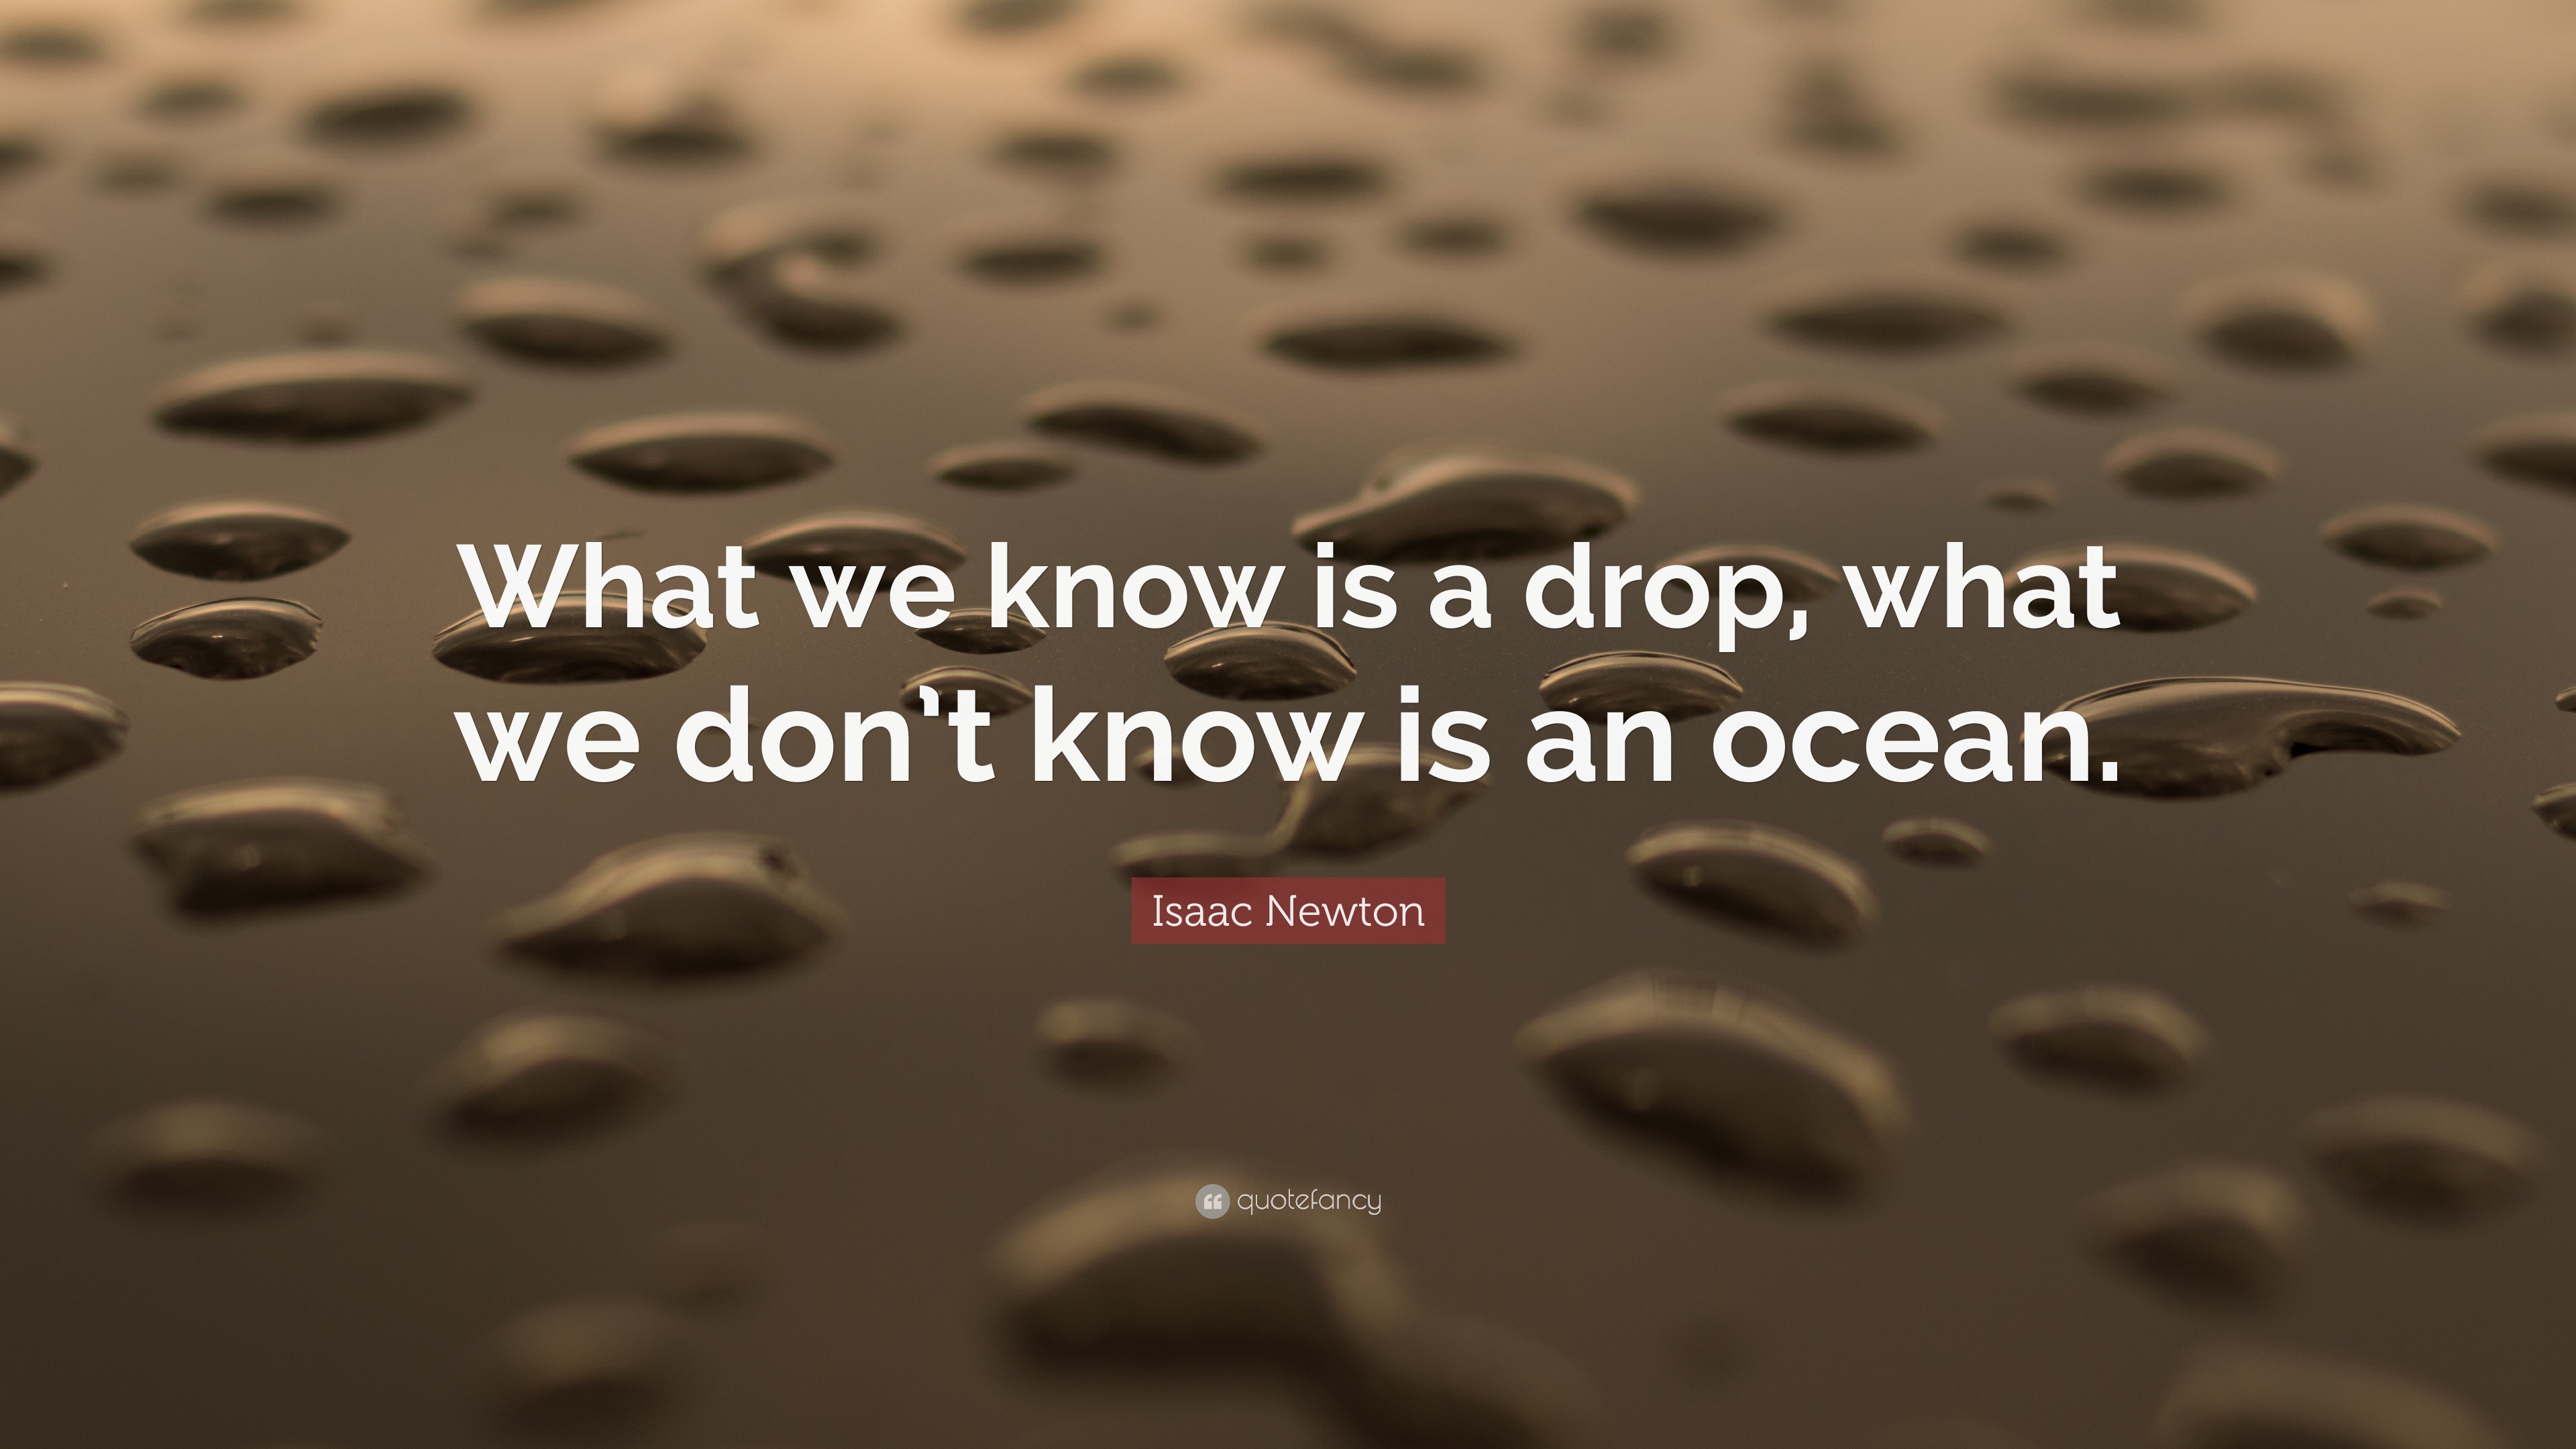 Isaac Newton Quote “what We Know Is A Drop What We Dont Know Is An Ocean” 0854